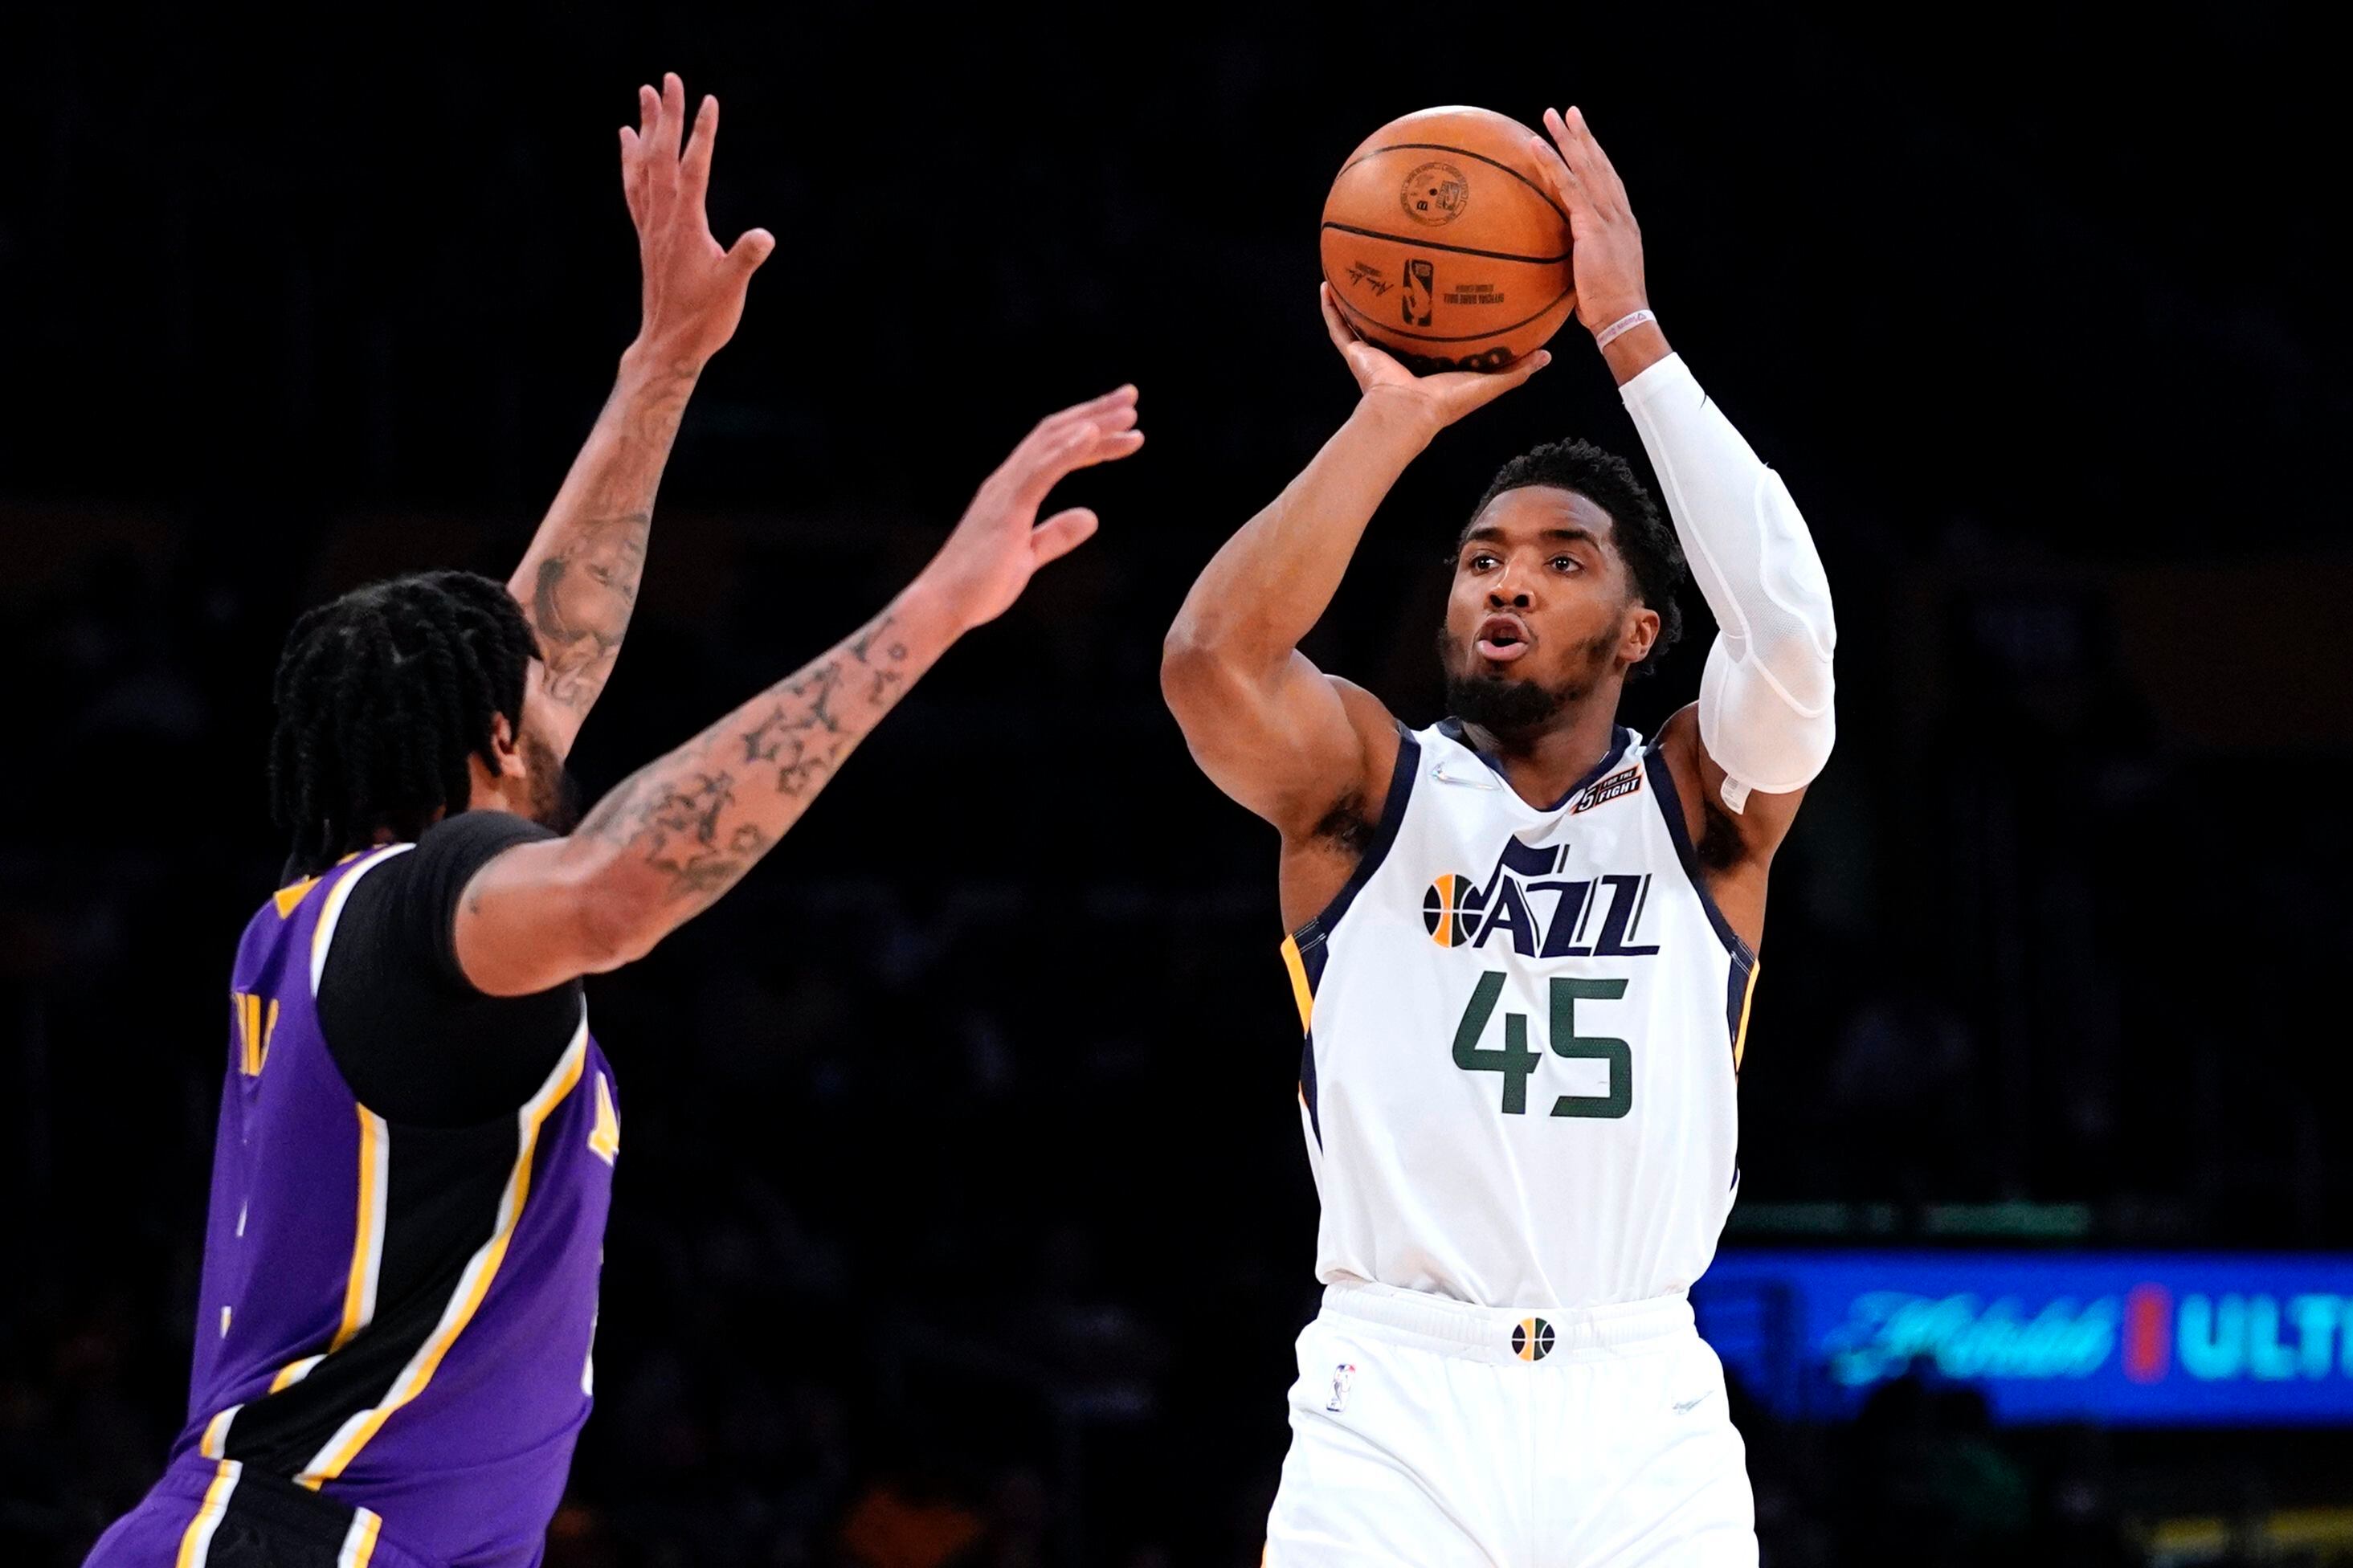 James fuels Lakers' 4th-quarter rally over Jazz, 106-101